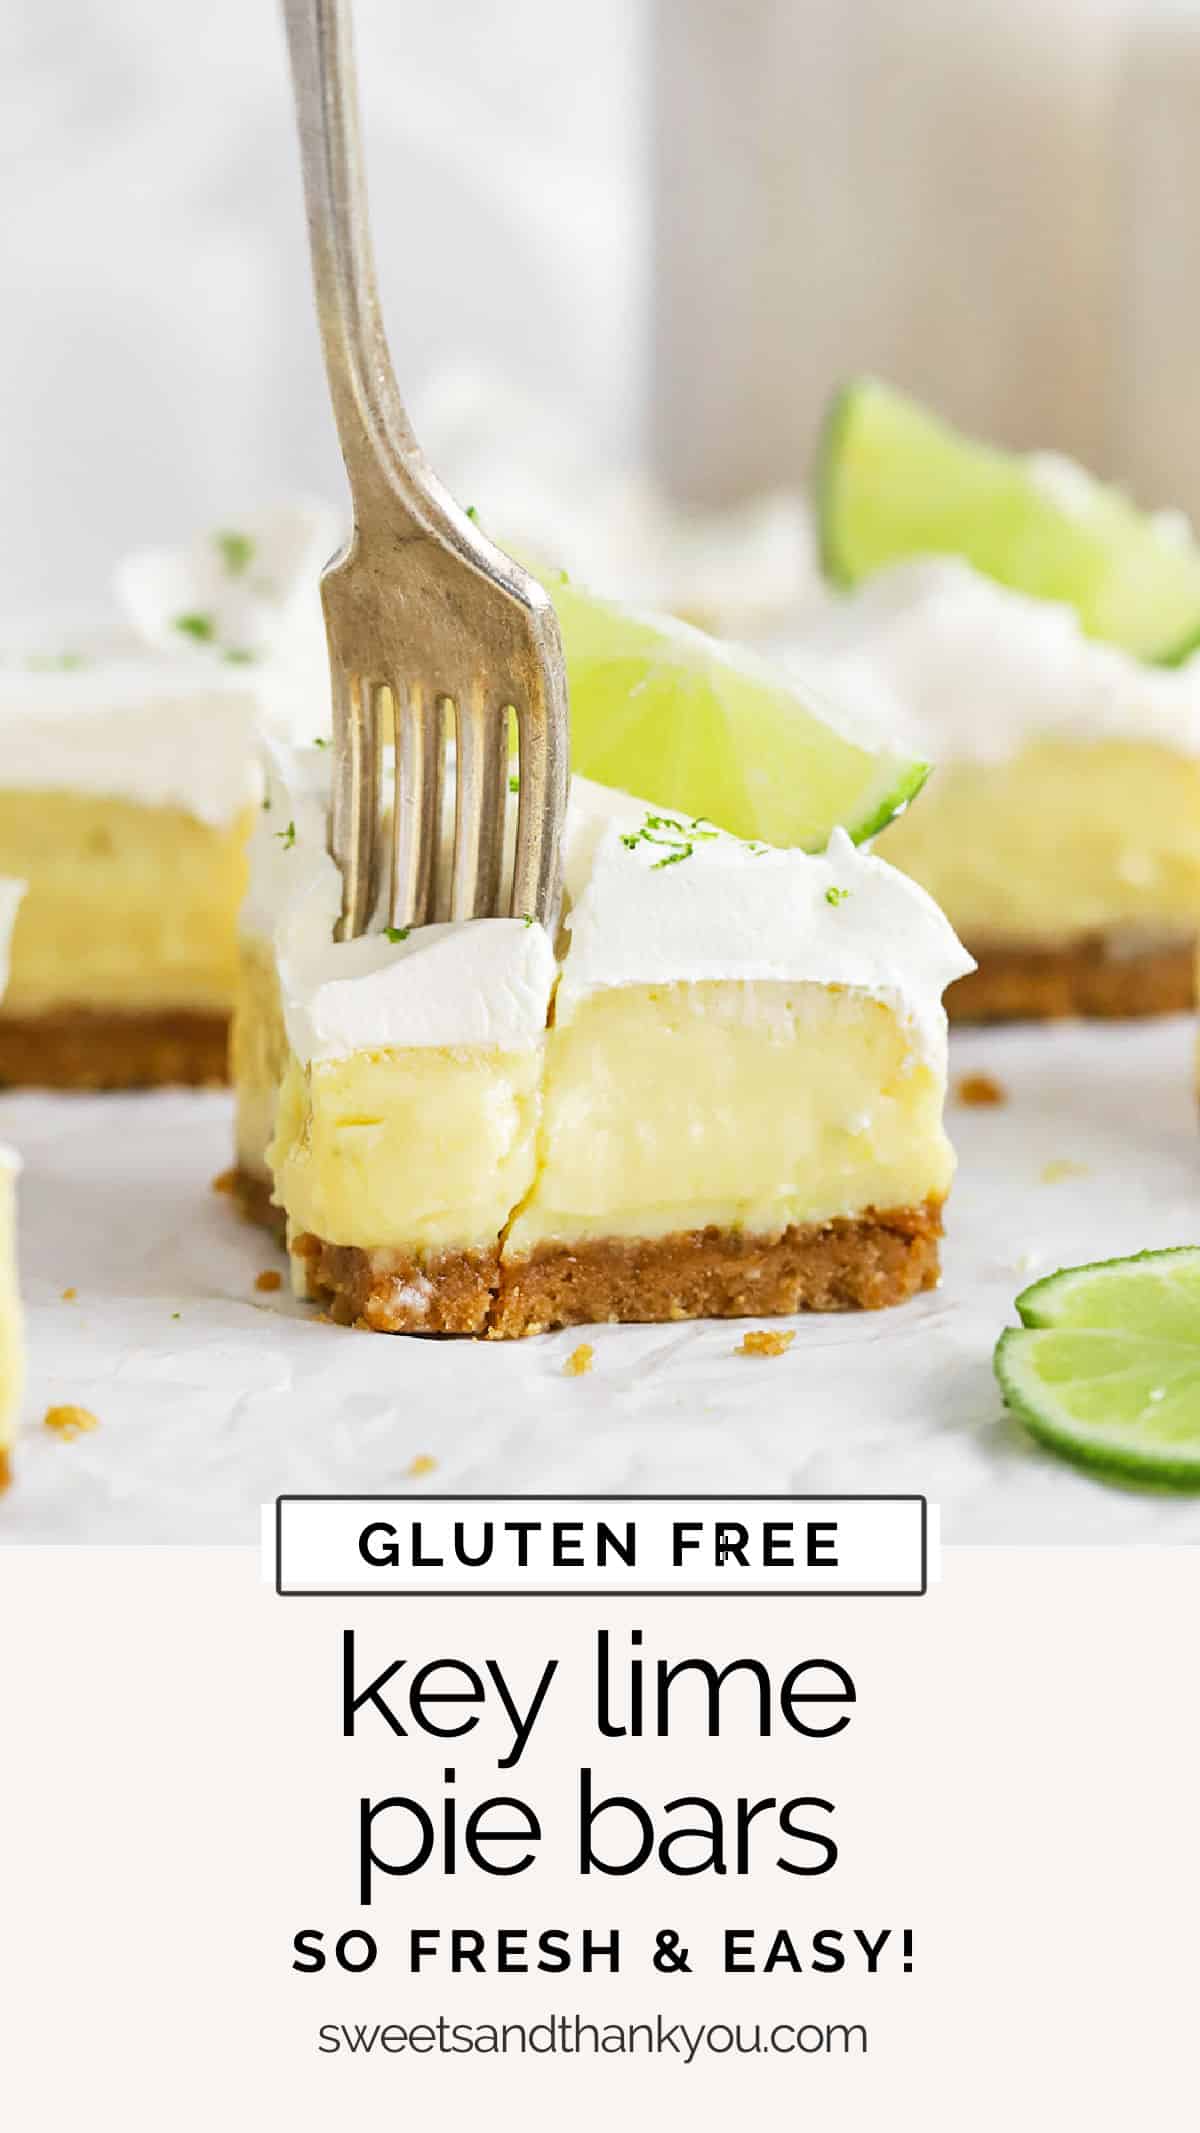 Gluten-Free Key Lime Pie Bar - Everything you love about key lime pie made easier! These key lime pie bars are fresh, bright, and so easy to make! // gluten-free key lime pie // gluten free pie bars // easy key lime pie // key lime pie filling // gluten free graham cracker crust // gluten-free key lime pie filling // easy gluten-free dessert // summer recipes // gluten free pie //